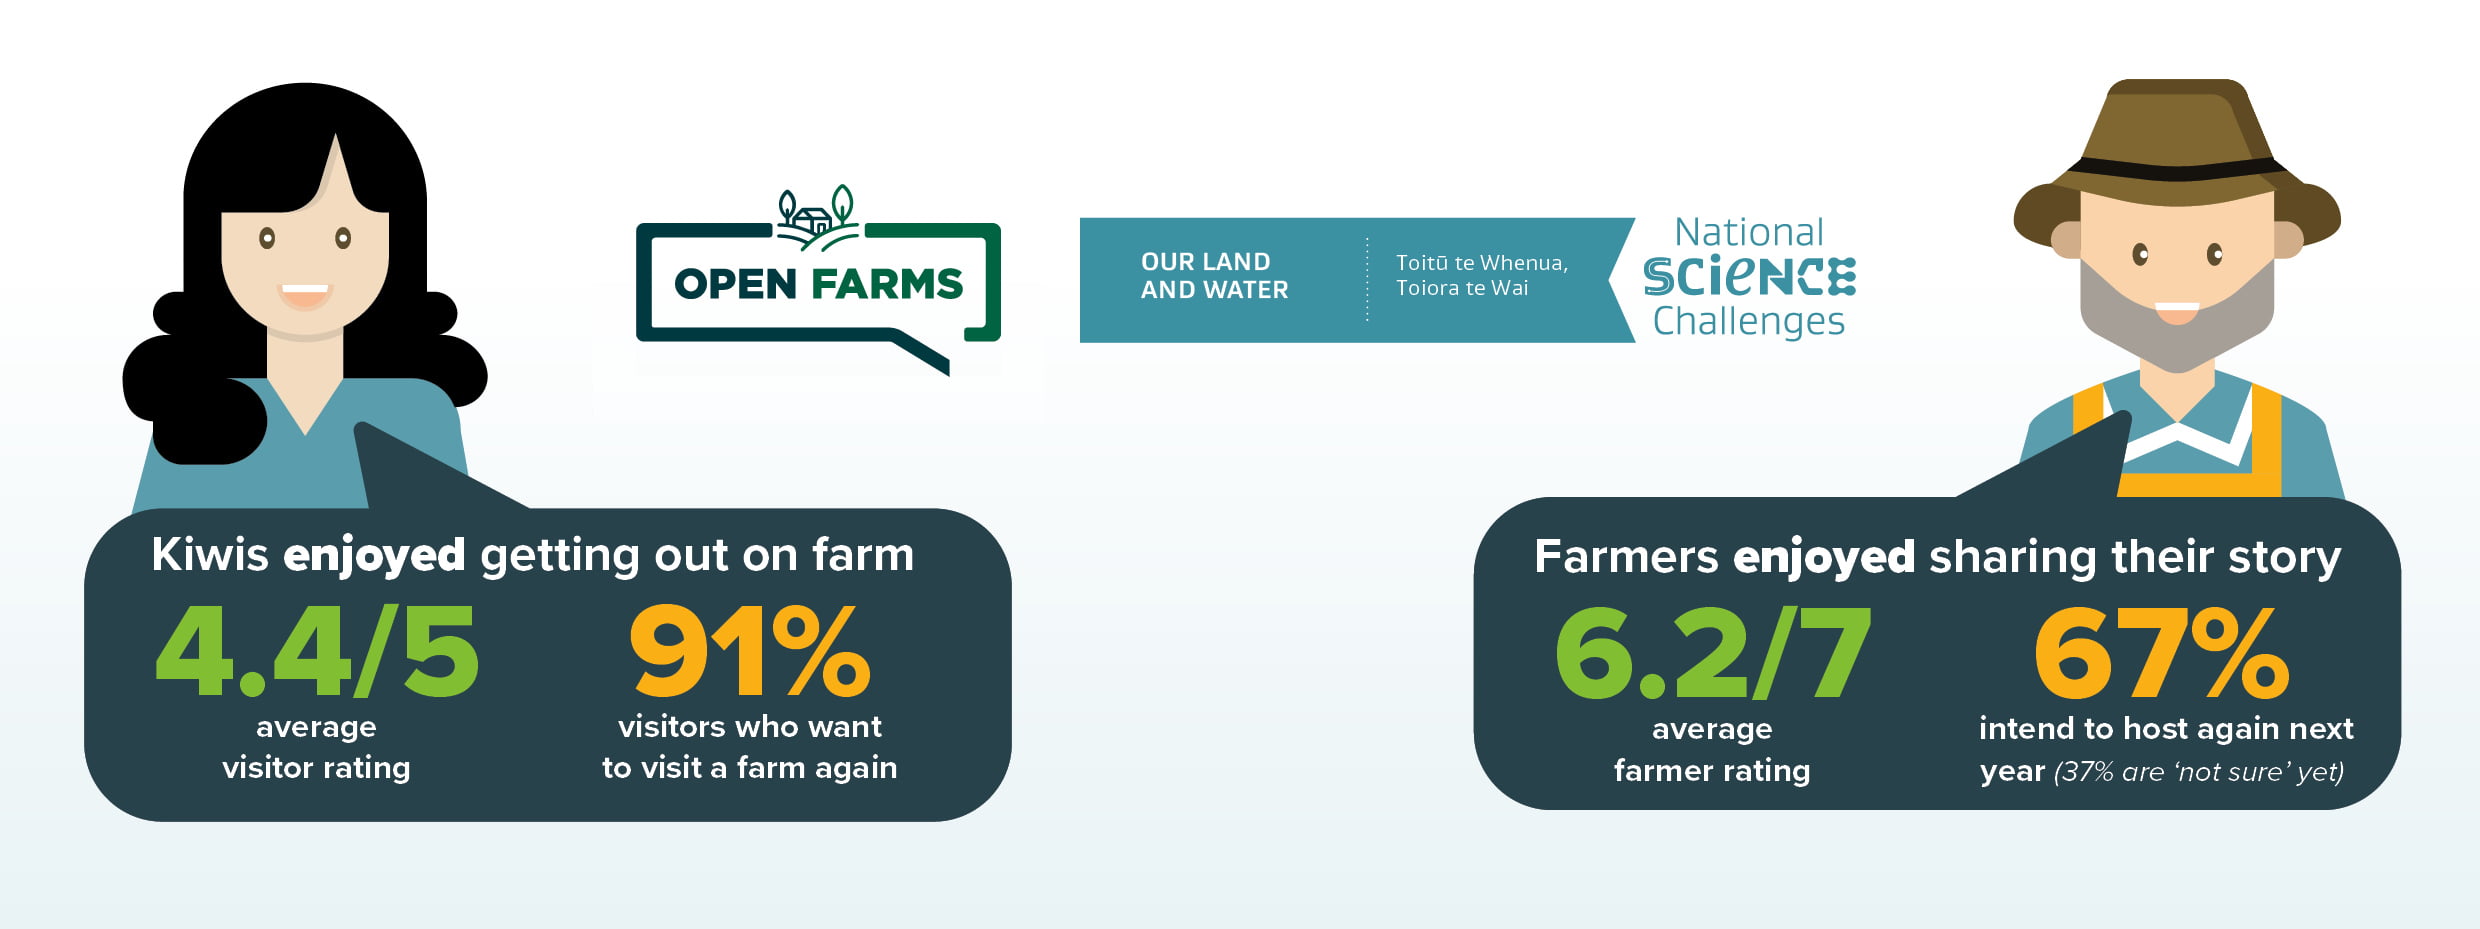 Visitors rated their farm day experience at 4.4/5 and farmers rated it 6.3/7